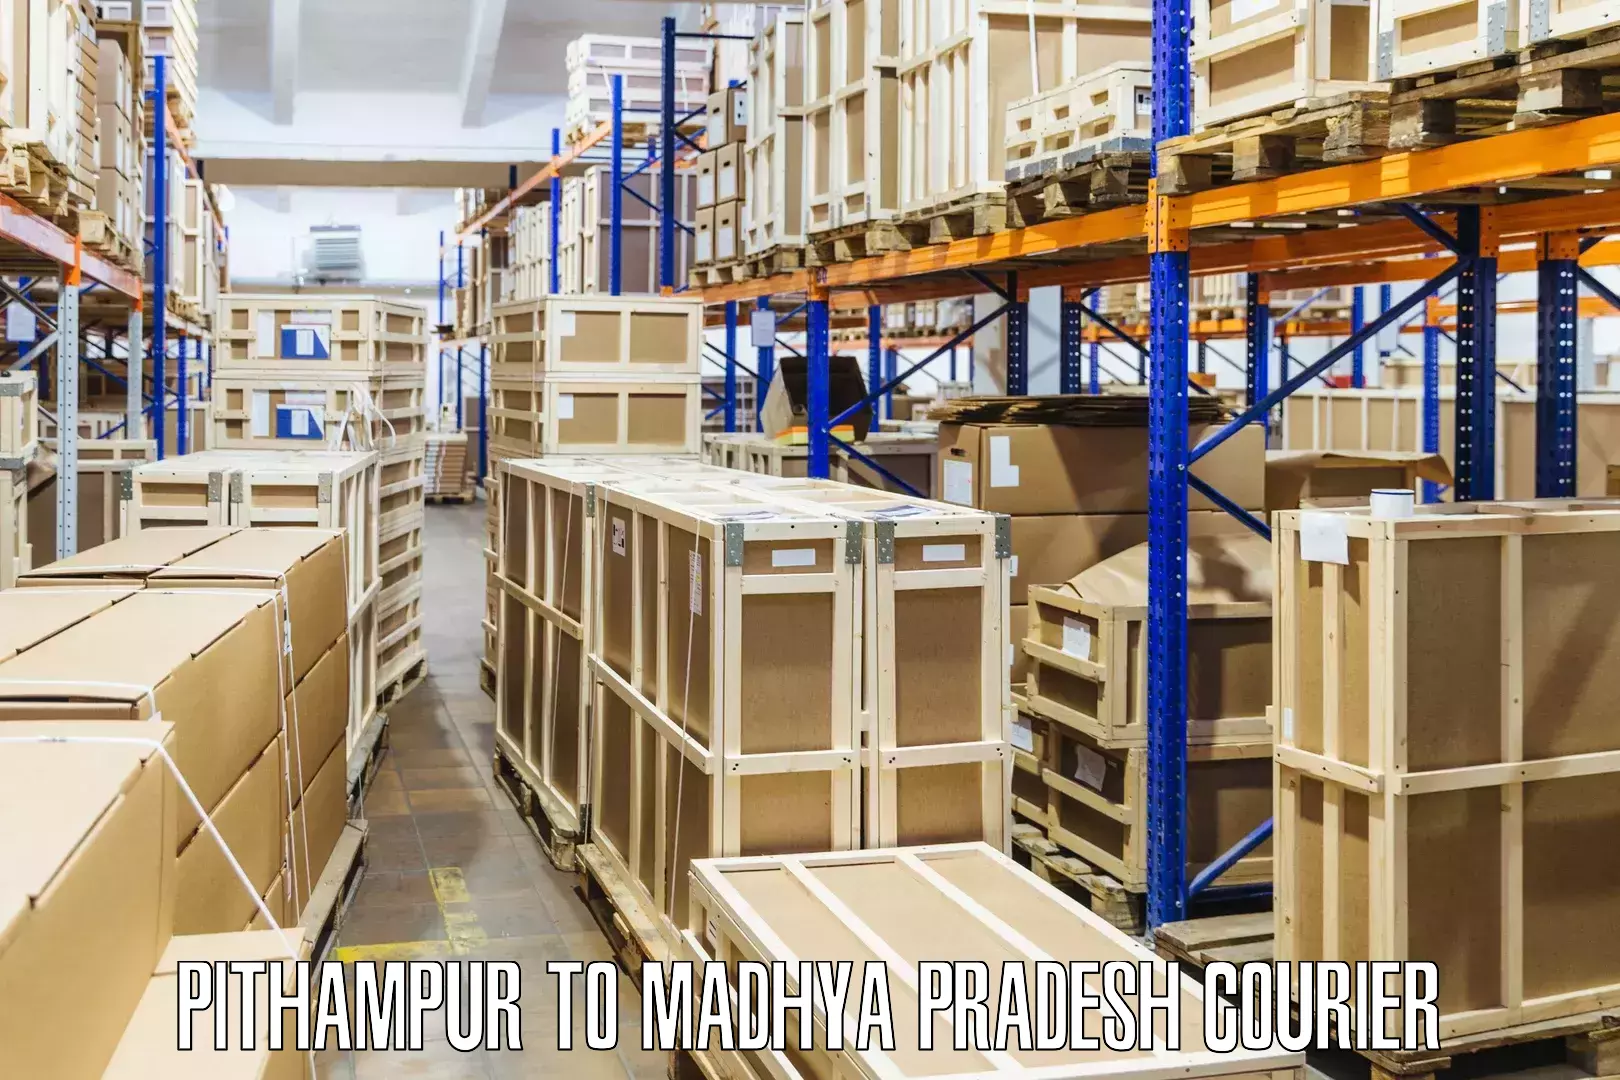 Reliable courier service Pithampur to Madhya Pradesh